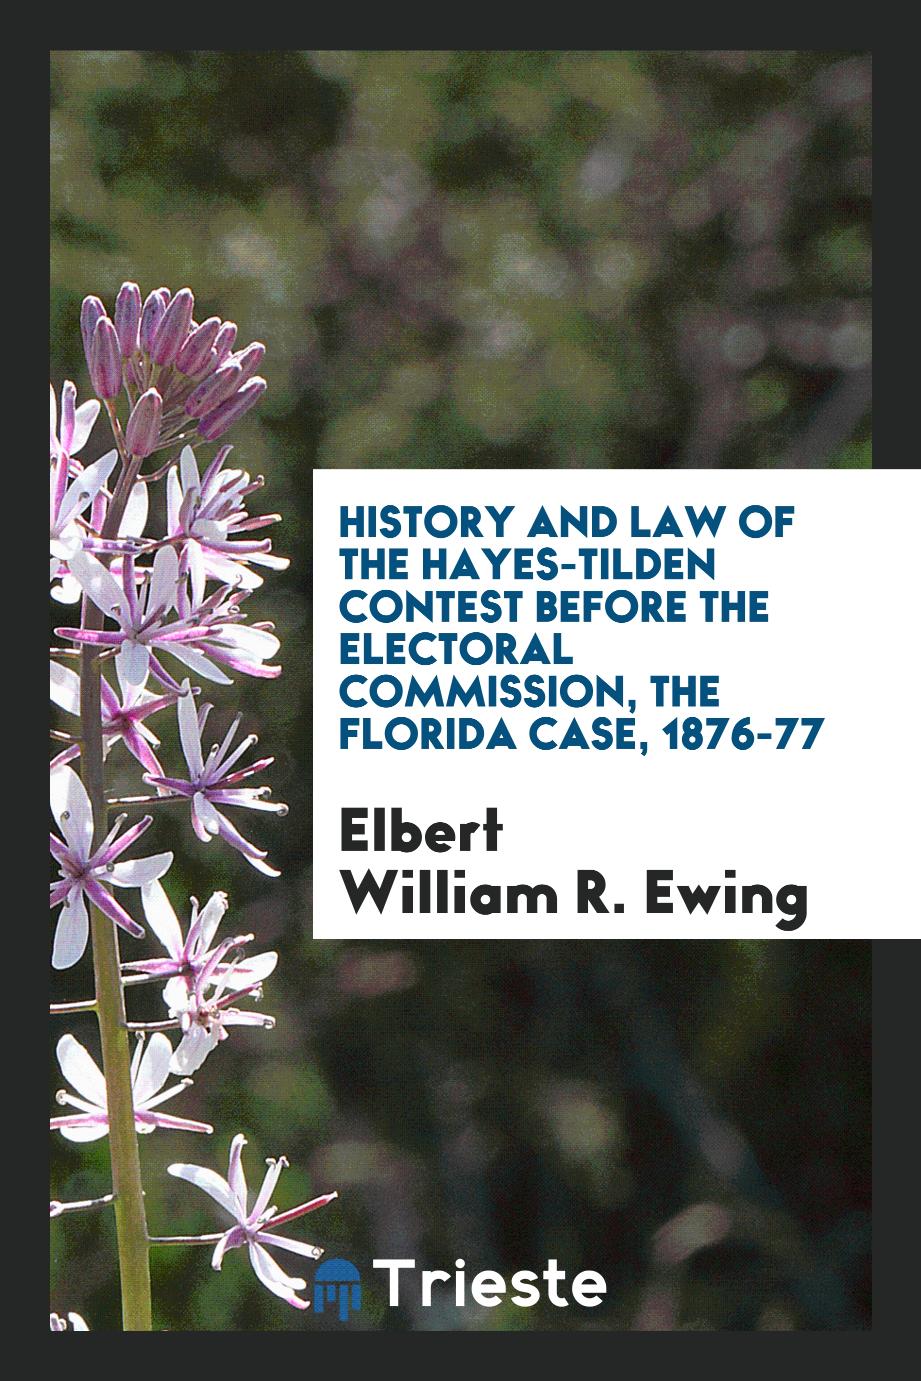 History and law of the Hayes-Tilden contest before the Electoral commission, the Florida case, 1876-77